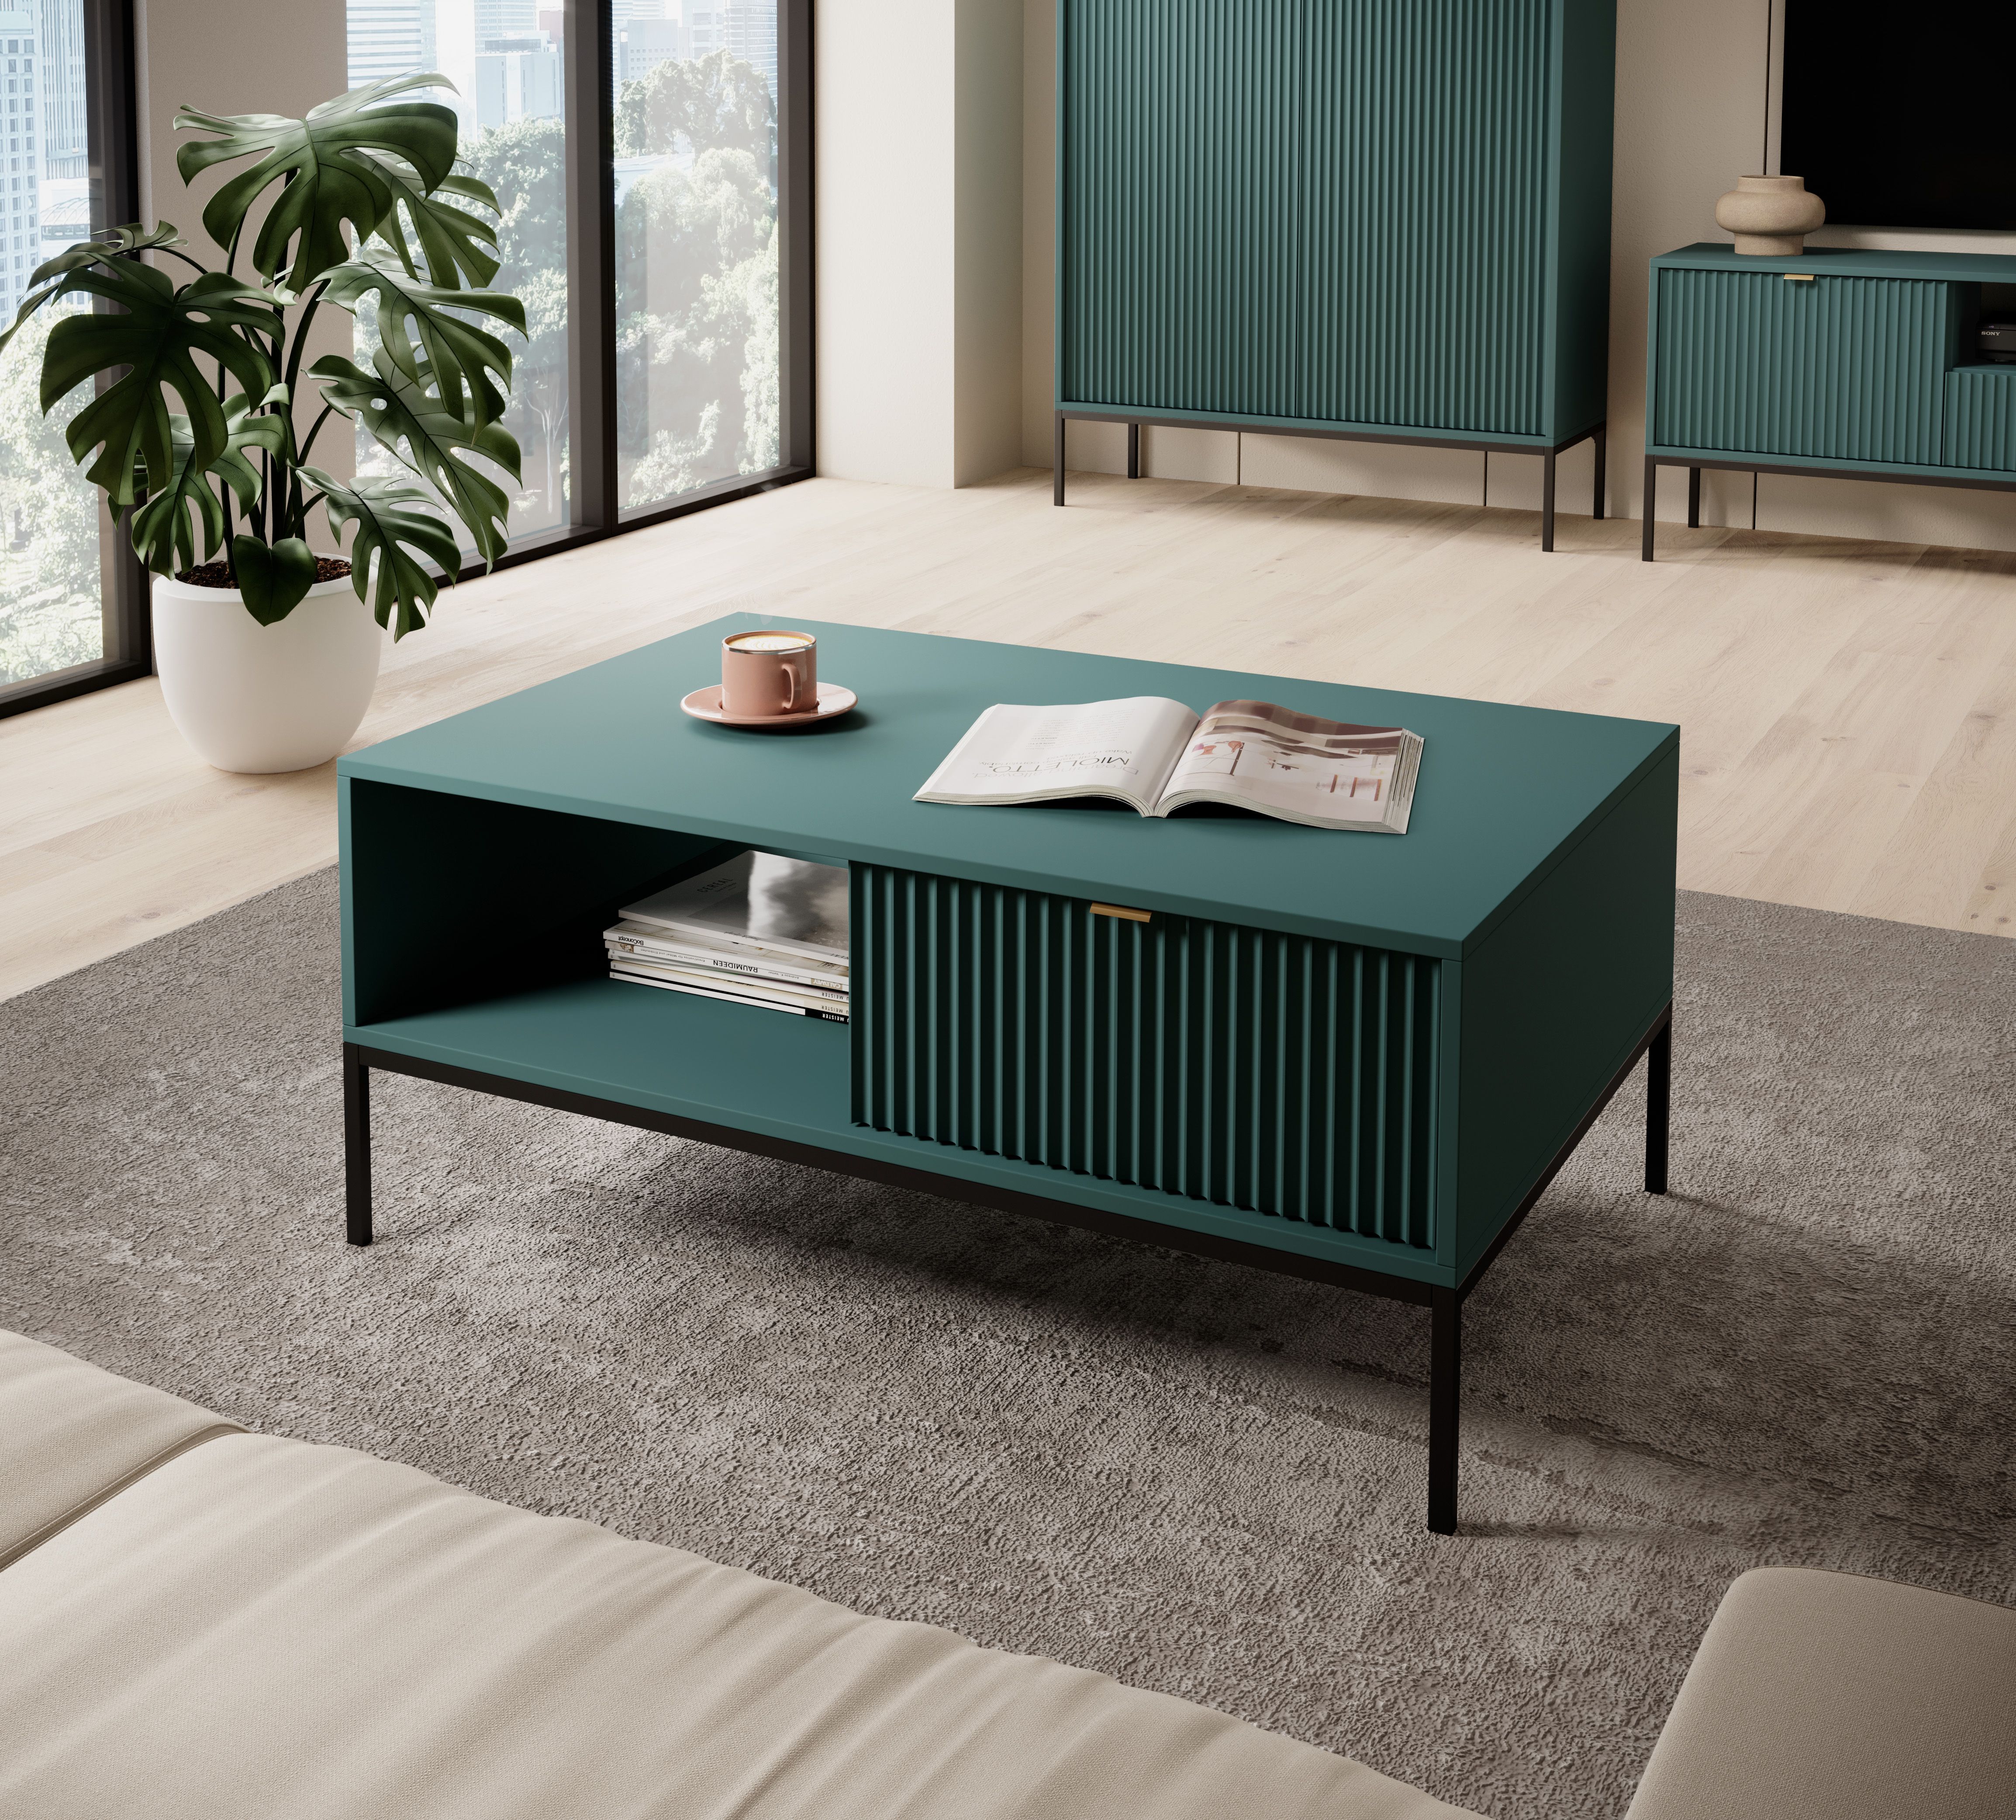 Table basse Worthing 08, Couleur : Turquoise / Noir / Or - dimensions : 46 x 104 x 68 cm (h x l x p)